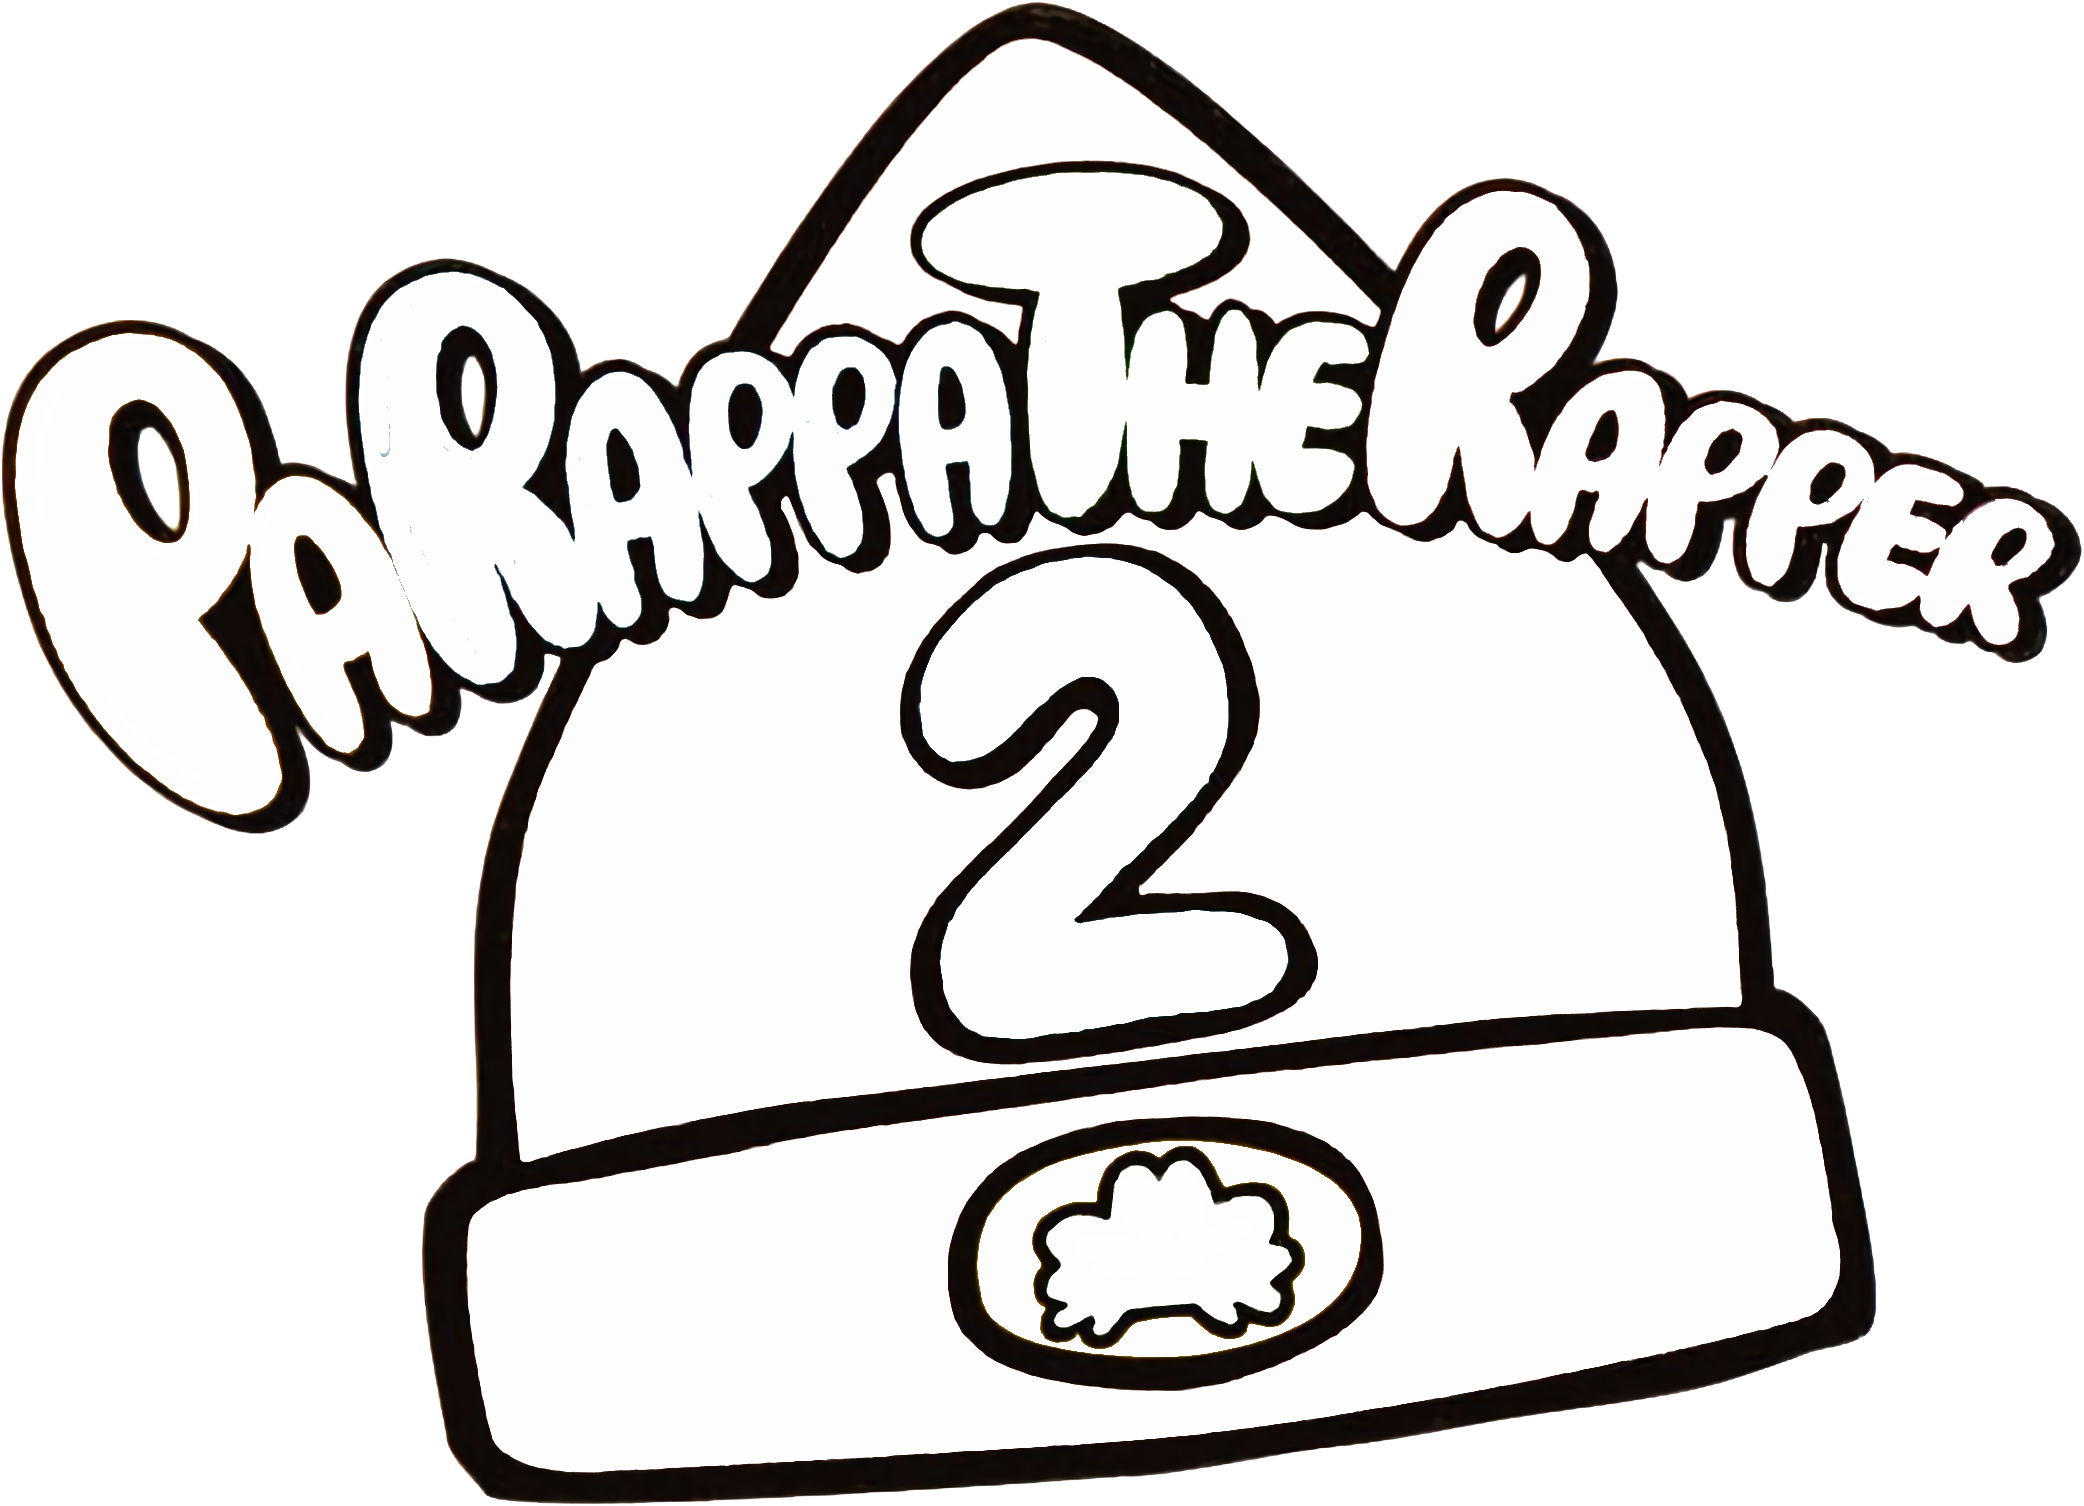 Parappa the Rapper 2 - SteamGridDB